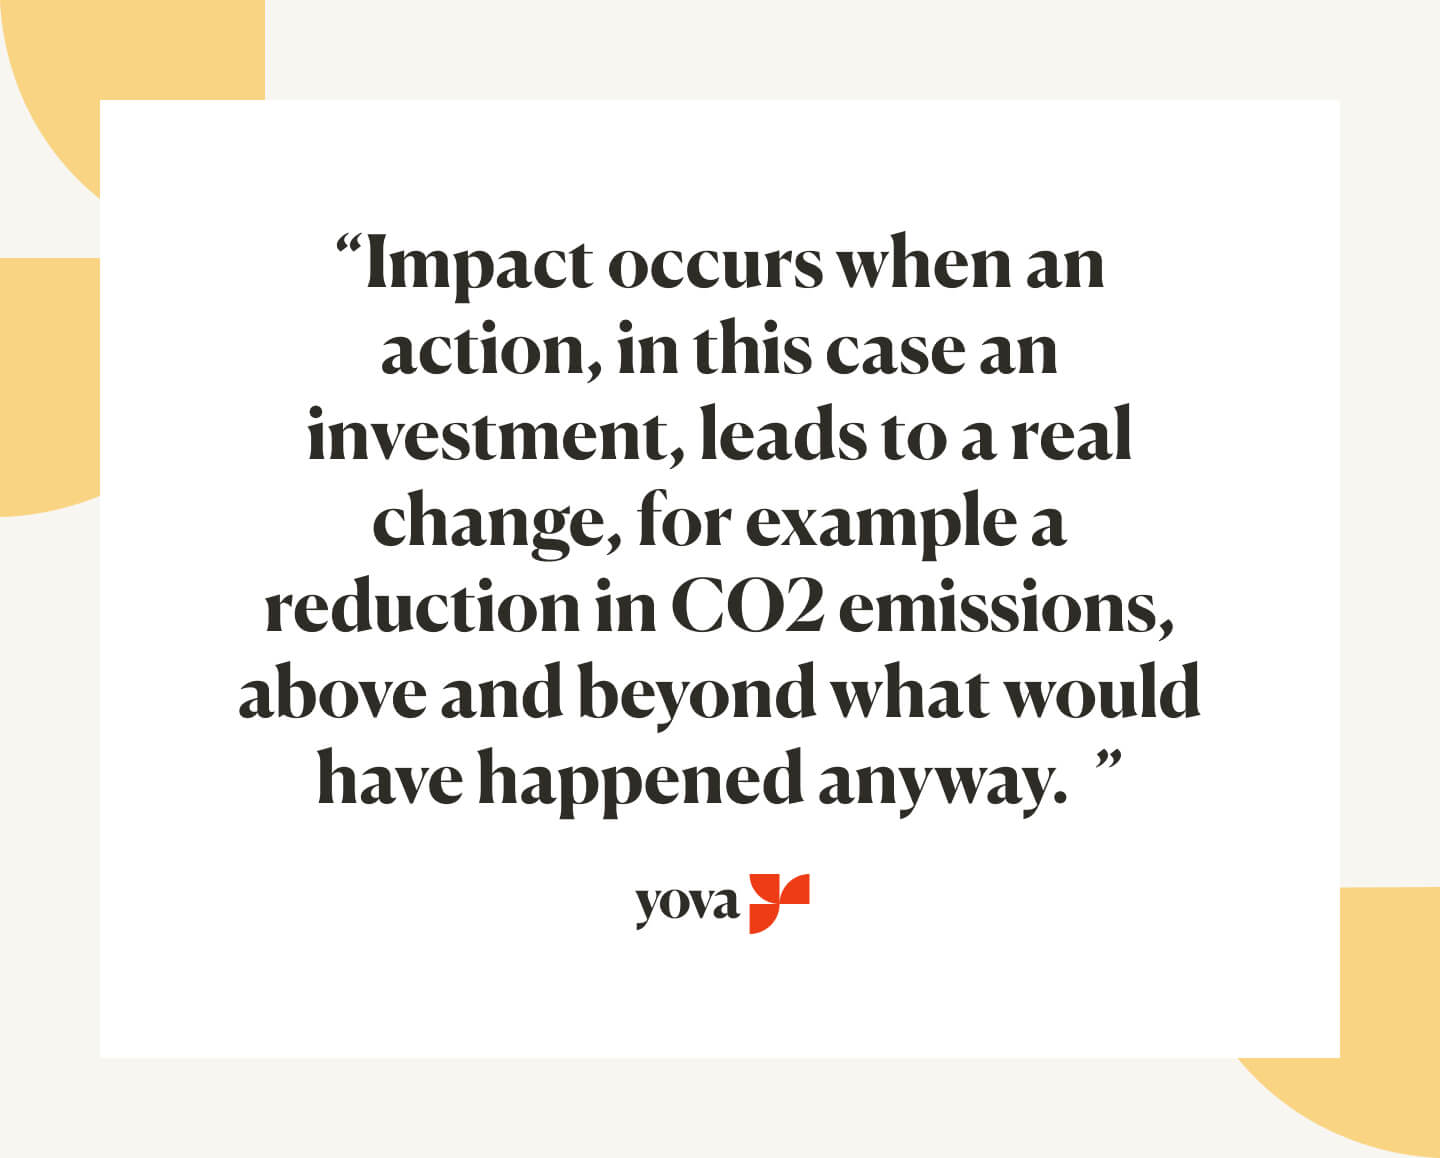 When does an investment have an impact?